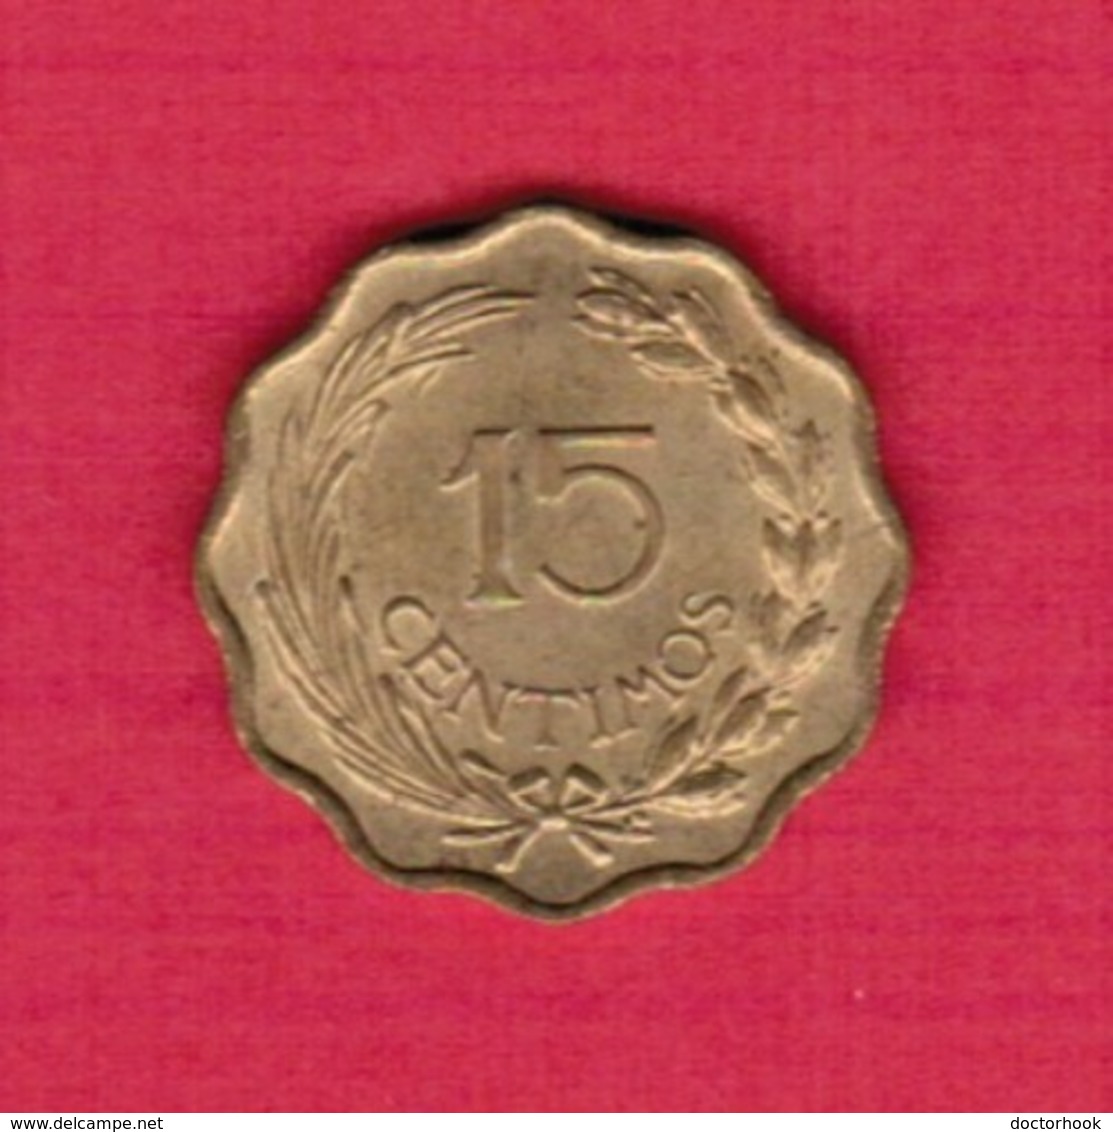 PARAGUAY  15 CENTIMOS 1953 (KM # 26) #5272 - Paraguay